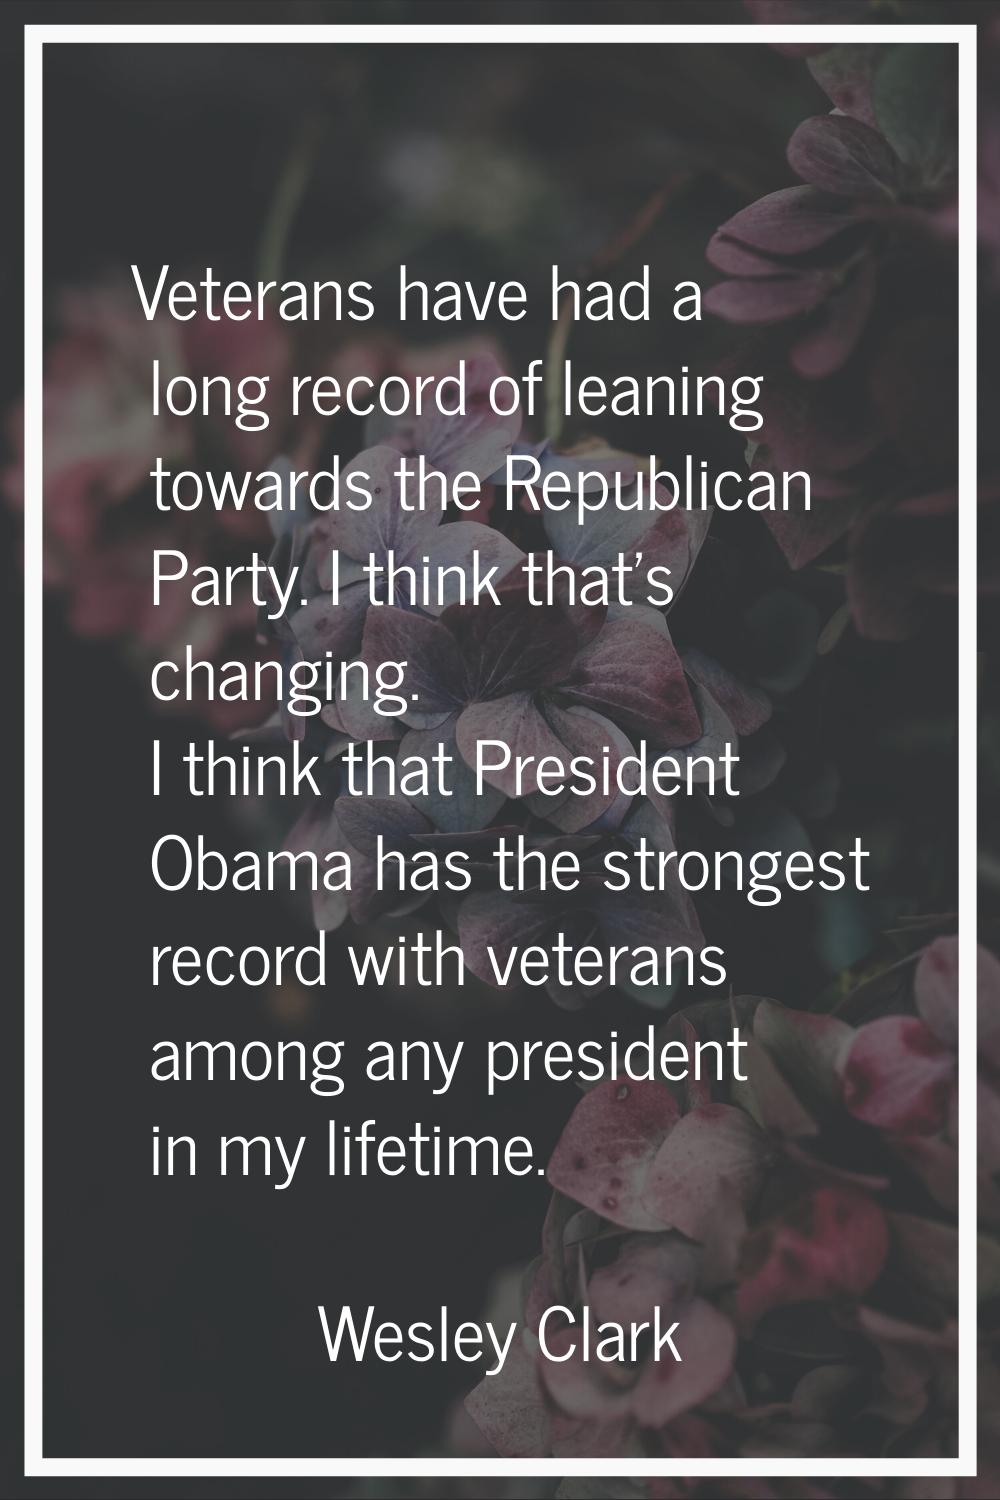 Veterans have had a long record of leaning towards the Republican Party. I think that's changing. I